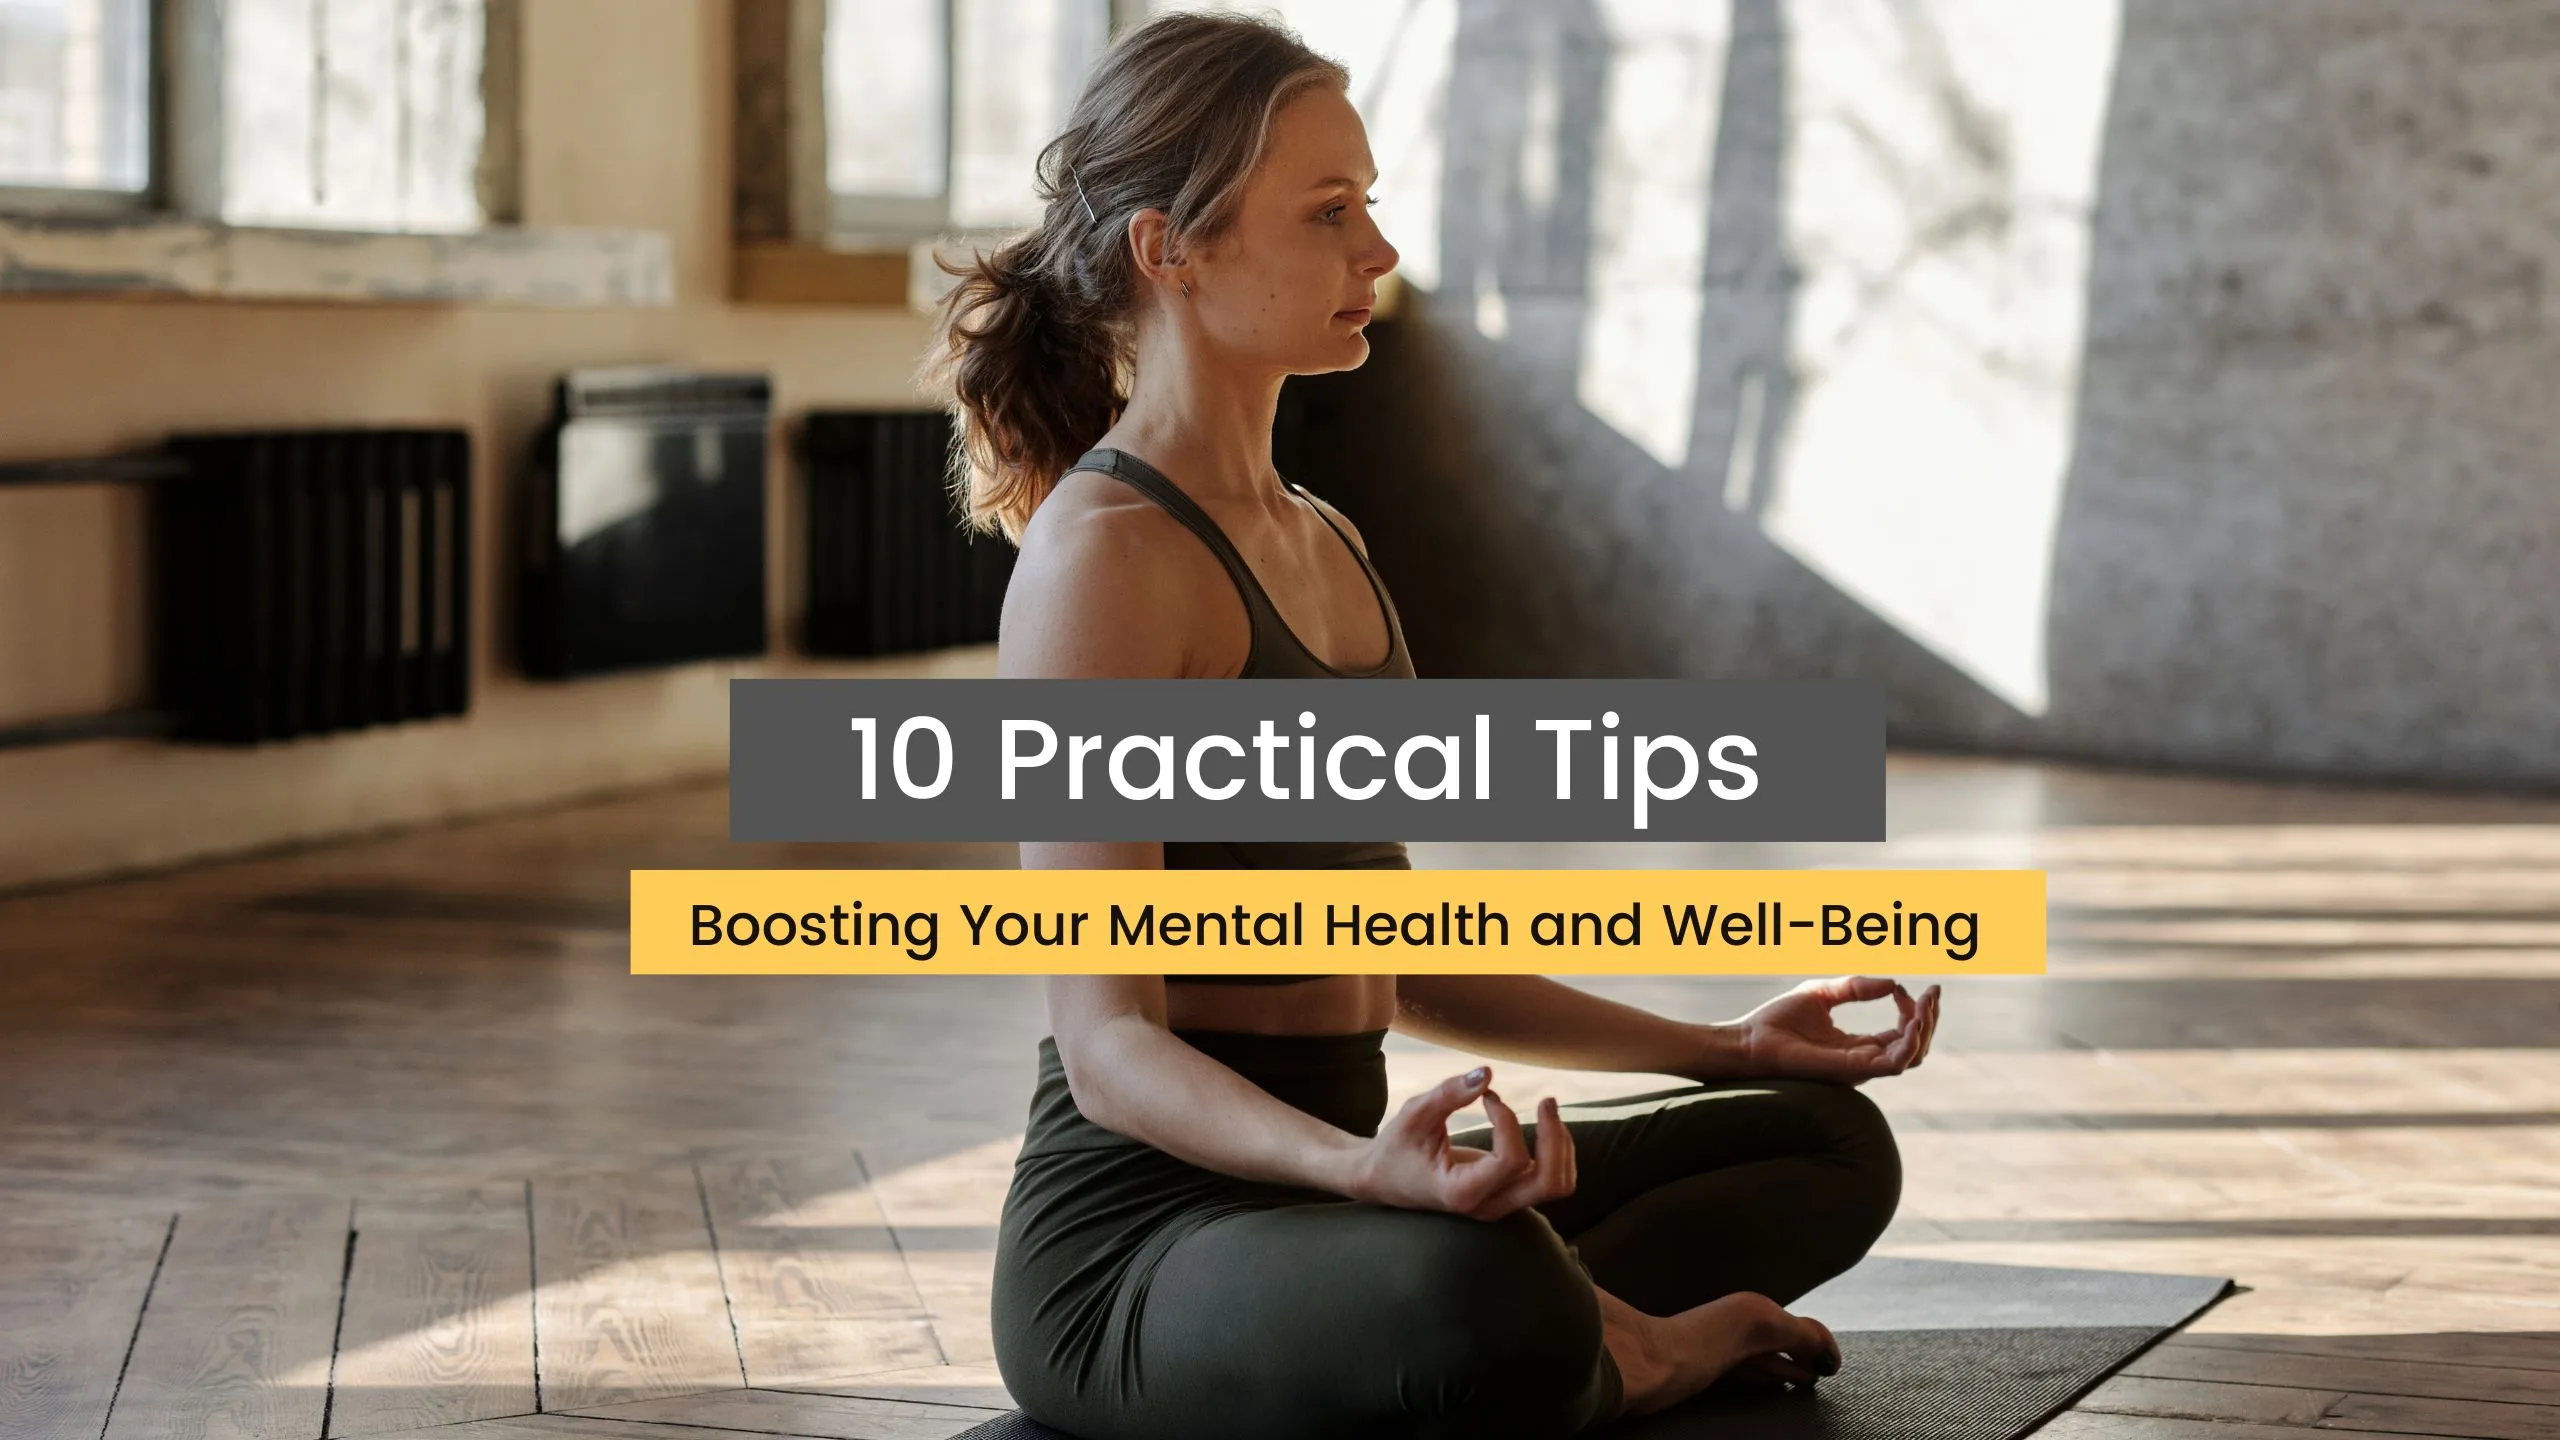 10 Practical Tips for Boosting Your Mental Health and Well-Being